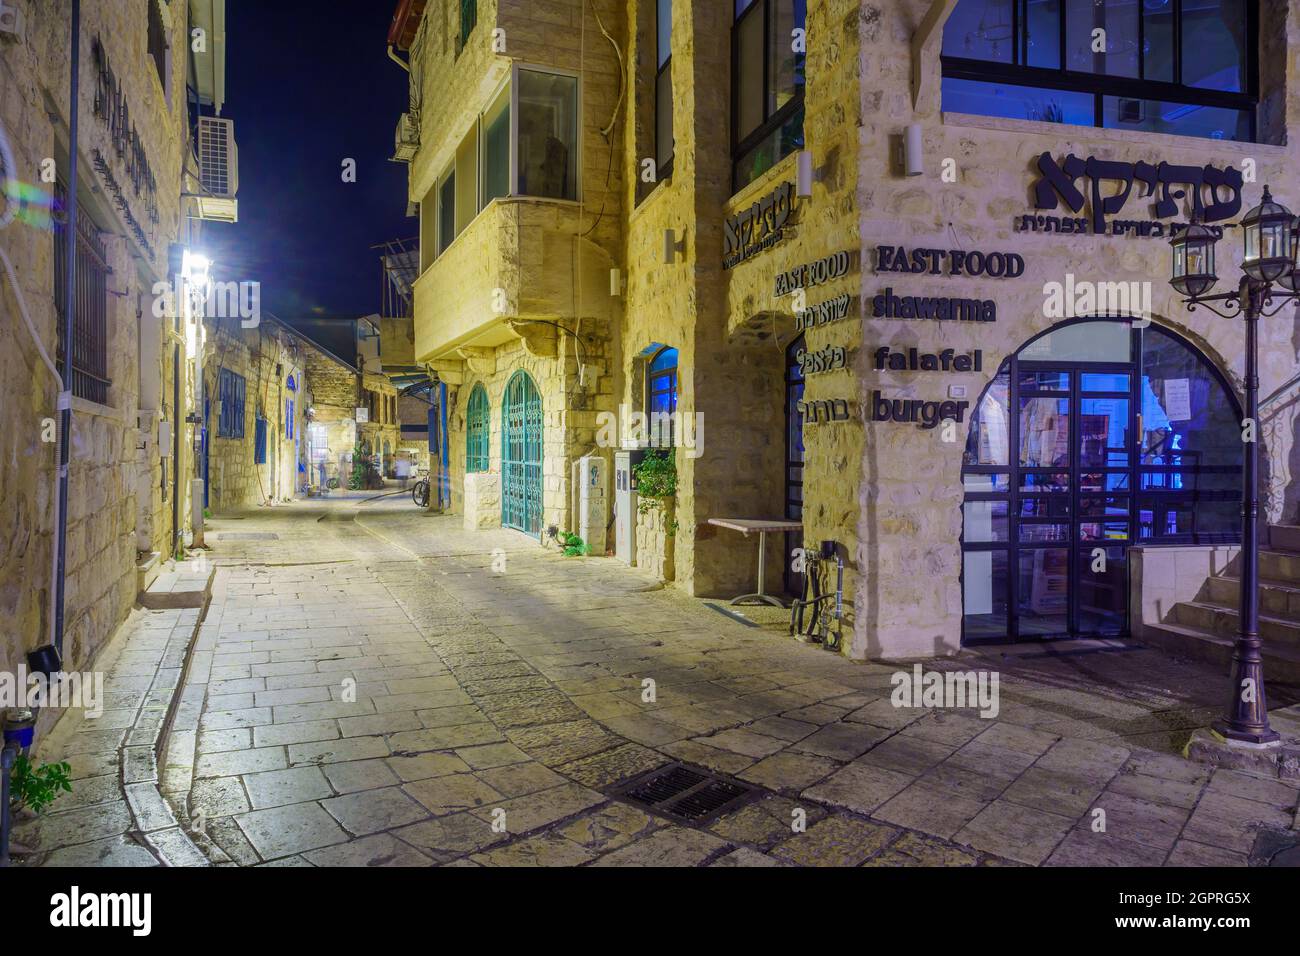 Safed, Israel - September 28, 2021: Evening view of an alley in the Jewish quarter, the old city of Safed (Tzfat), Israel Stock Photo